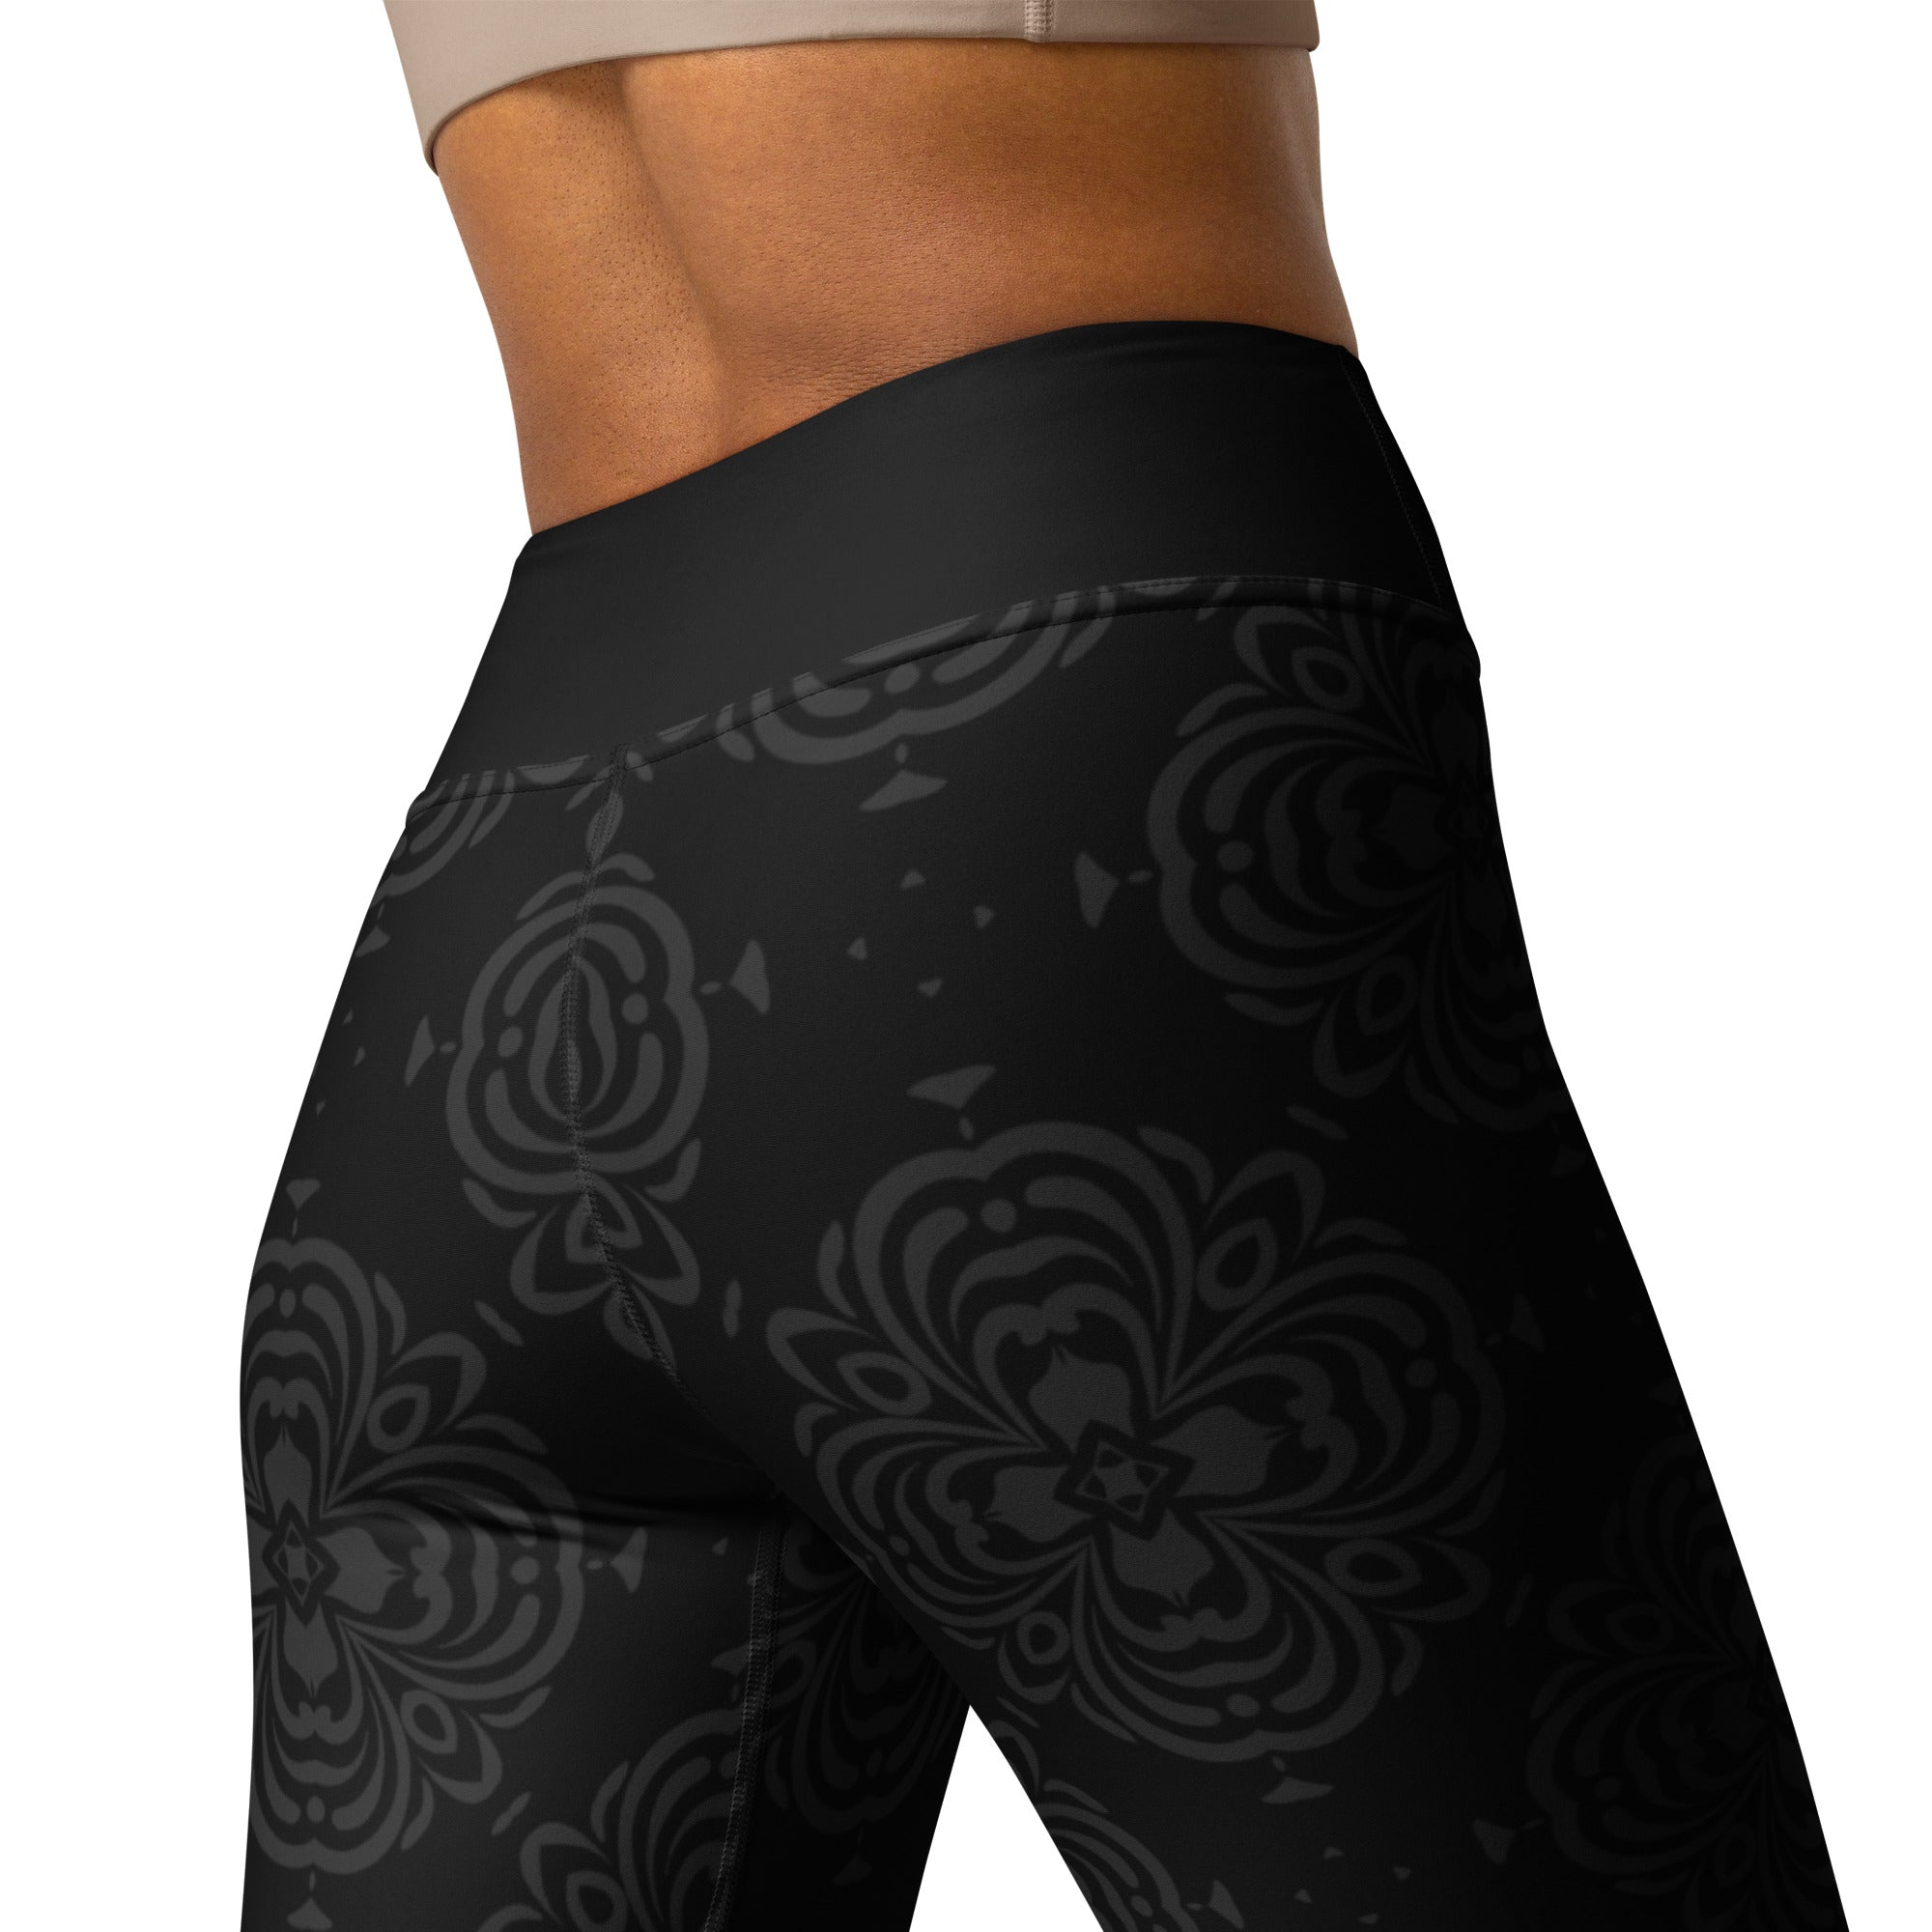 Close-up of the Blossoming Beauty Yoga Leggings' fabric and floral pattern.